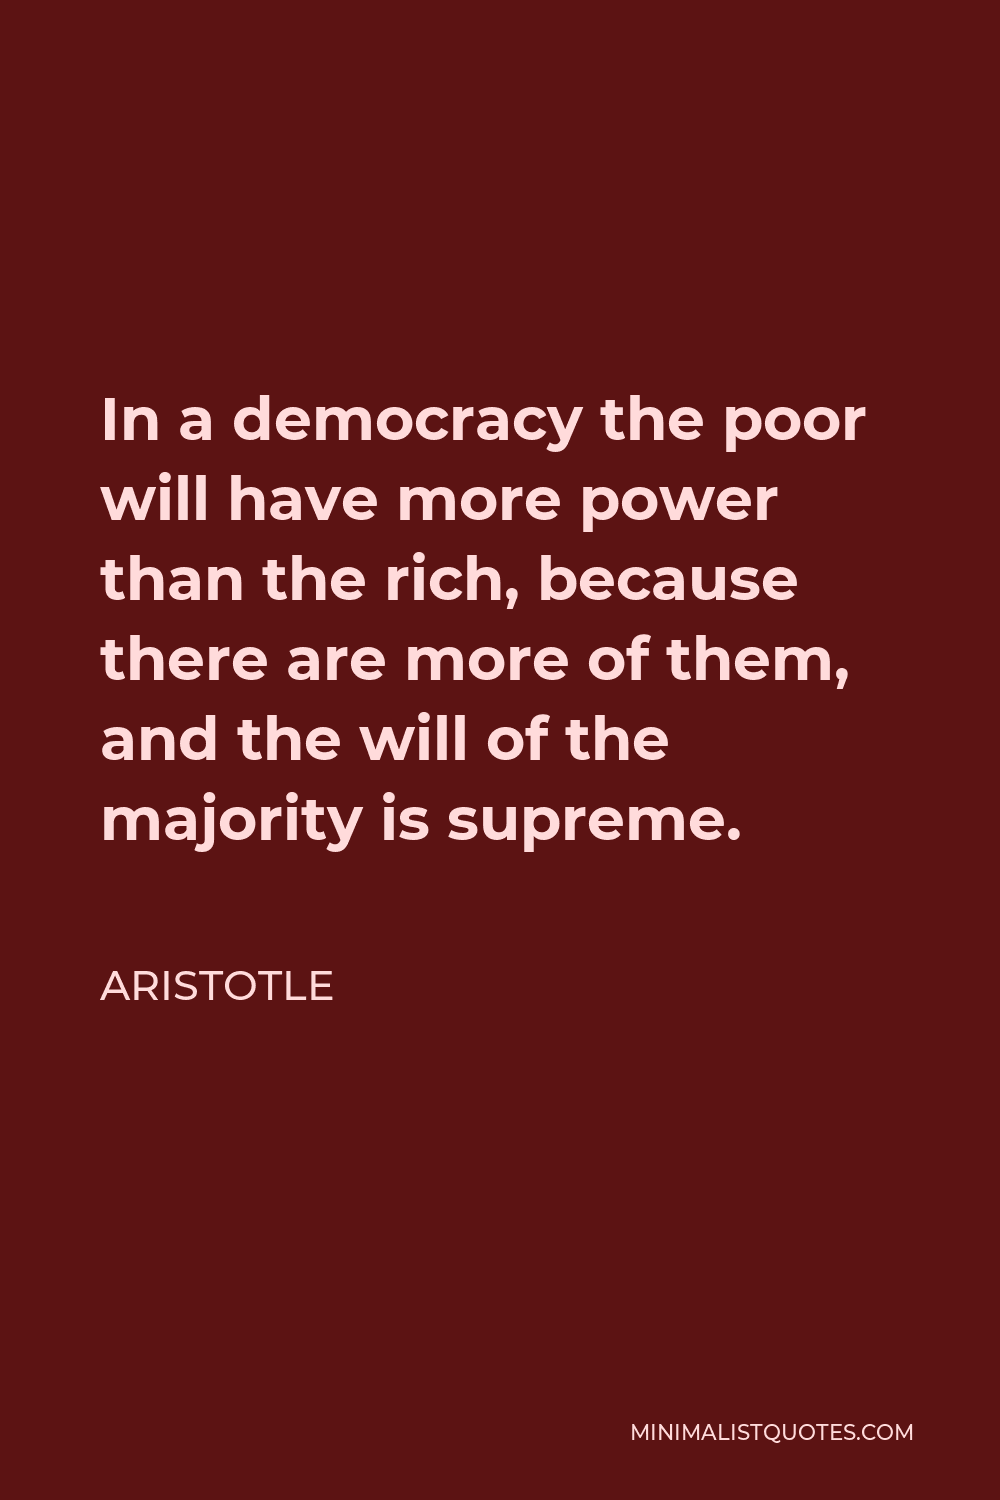 Aristotle Quote - In a democracy the poor will have more power than the rich, because there are more of them, and the will of the majority is supreme.